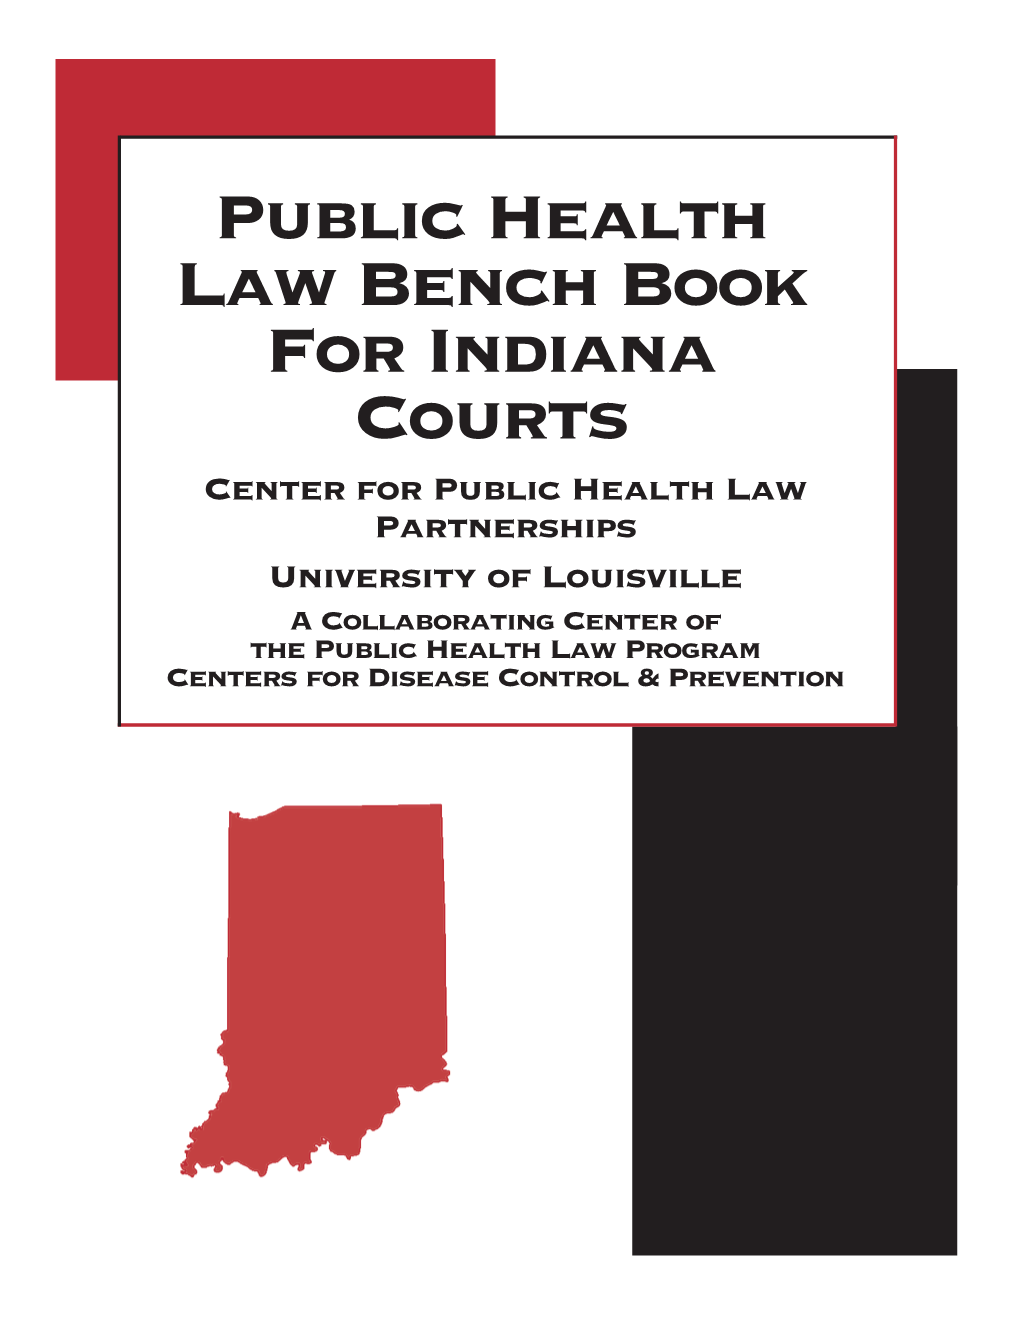 Bench Book for Indiana Courts